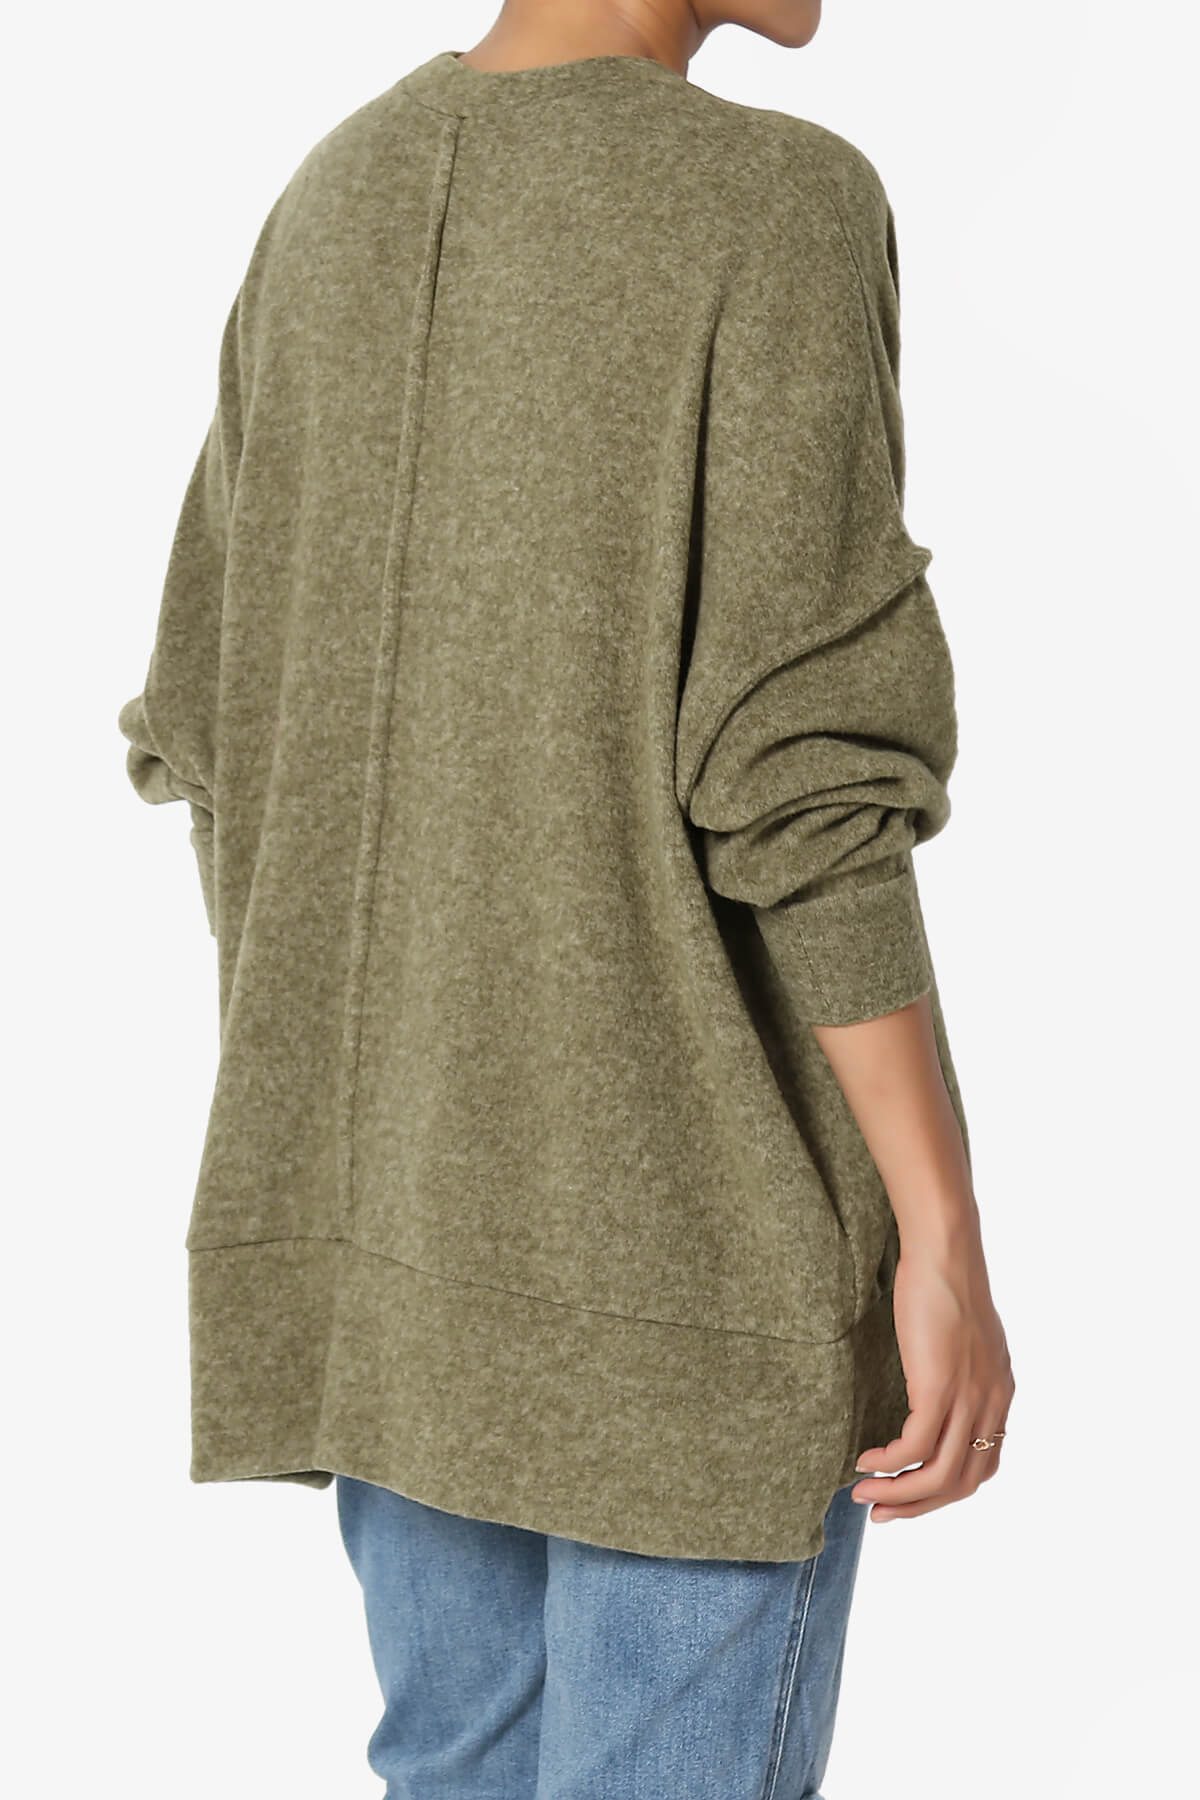 Load image into Gallery viewer, Breccan Blushed Knit Oversized Sweater OLIVE KHAKI_4
